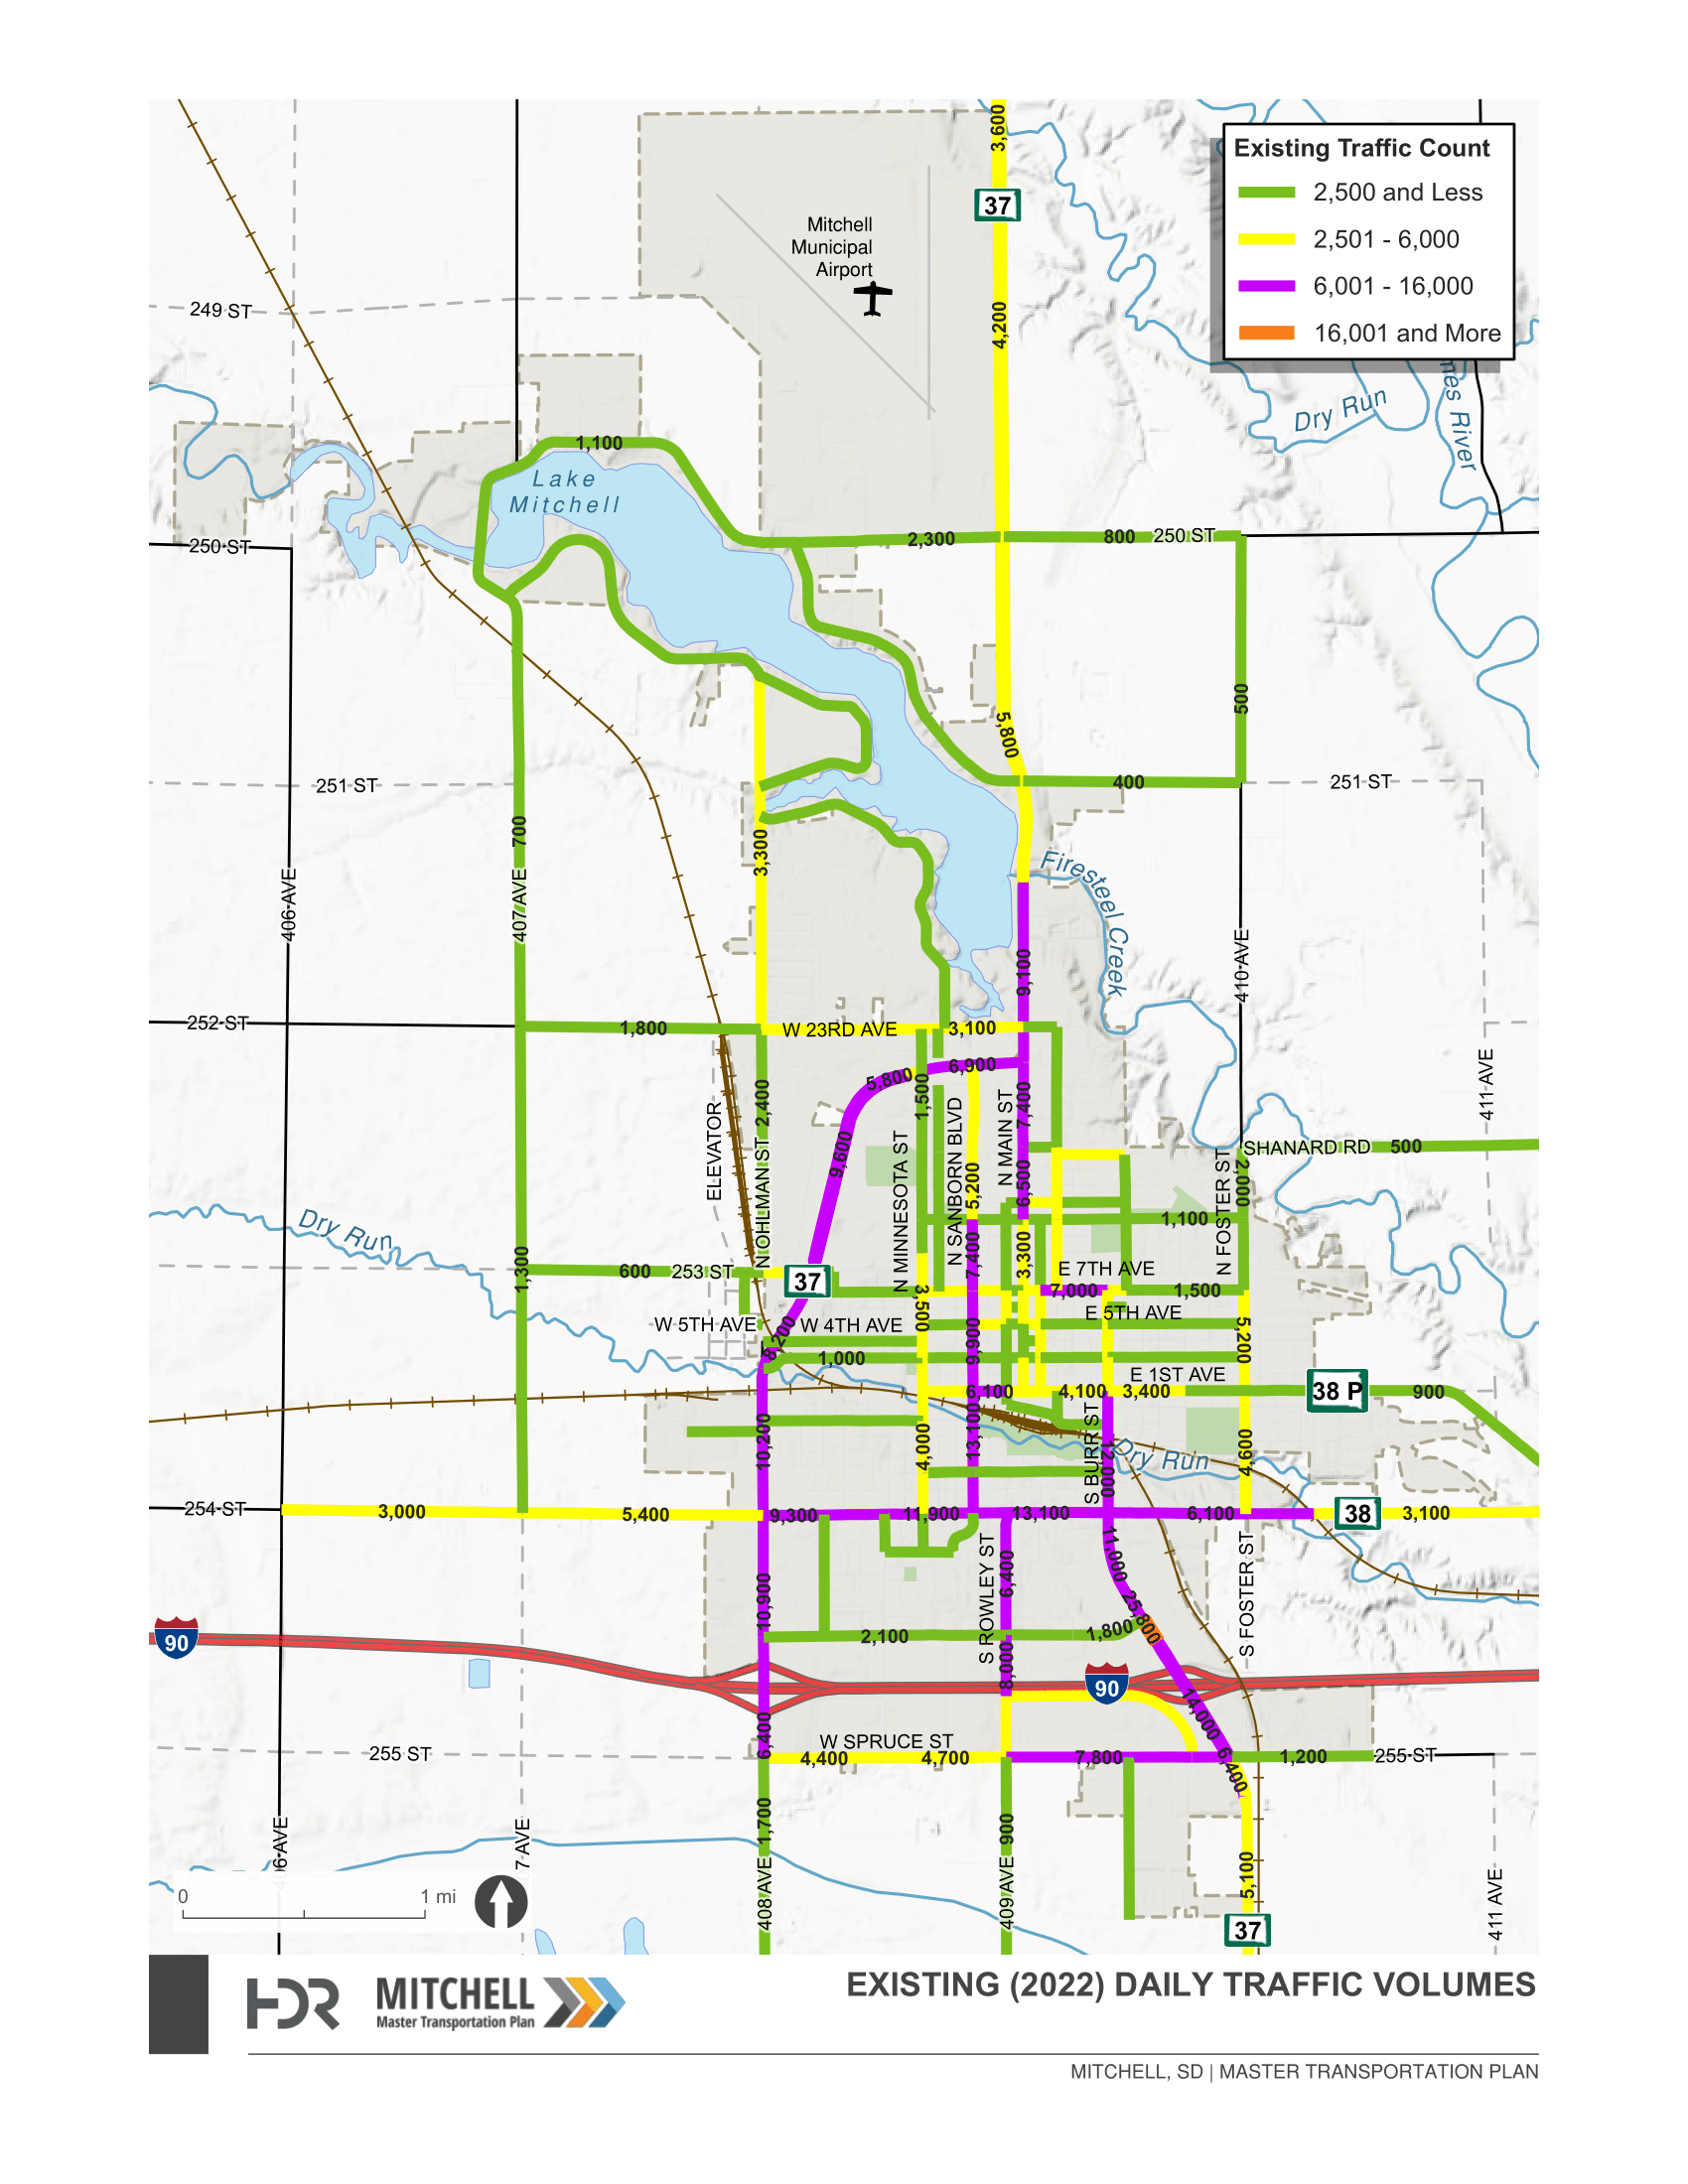 Summary of existing (2022) daily traffic volumes on roadway segments throughout the Mitchell area.